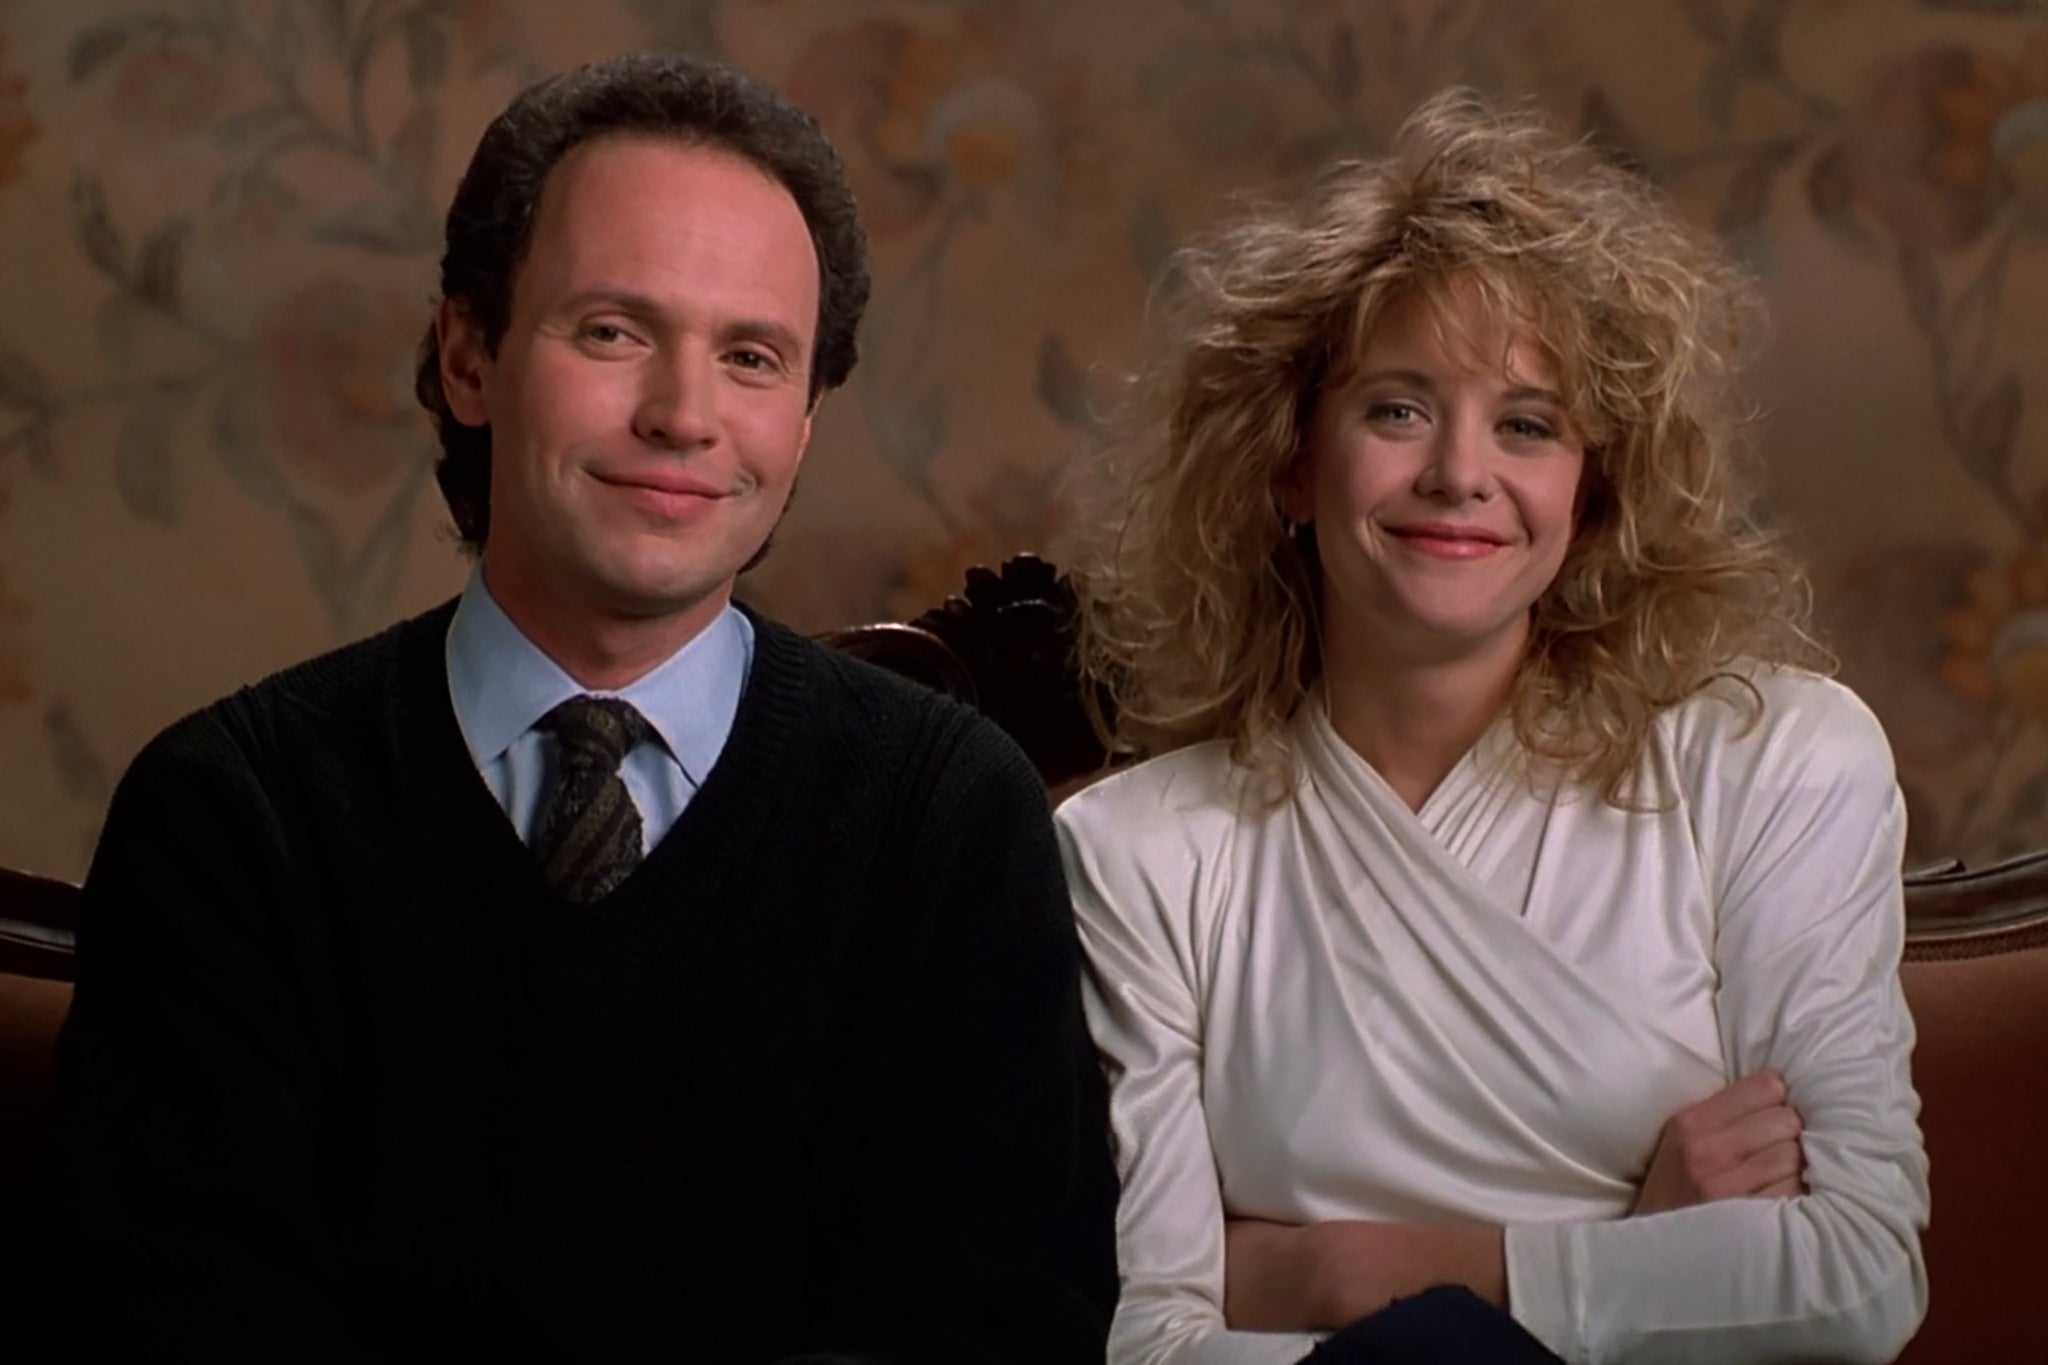 Met cute: Billy Crystal’s Harry and Meg Ryan’s Sally discuss how they met and fell in love in the classic romcom ‘When Harry Met Sally’